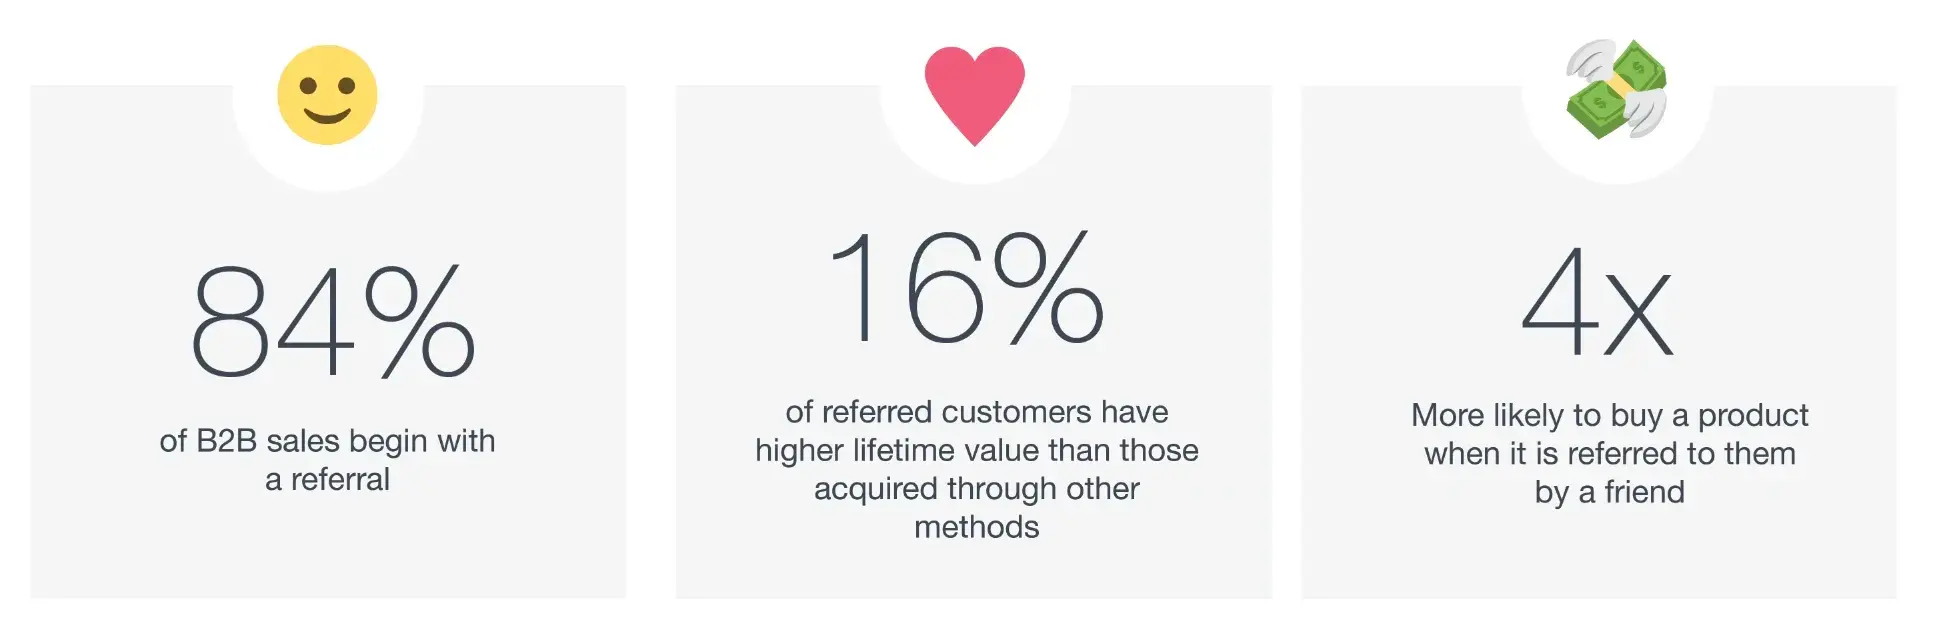 Benefit of Referral Sales Stats